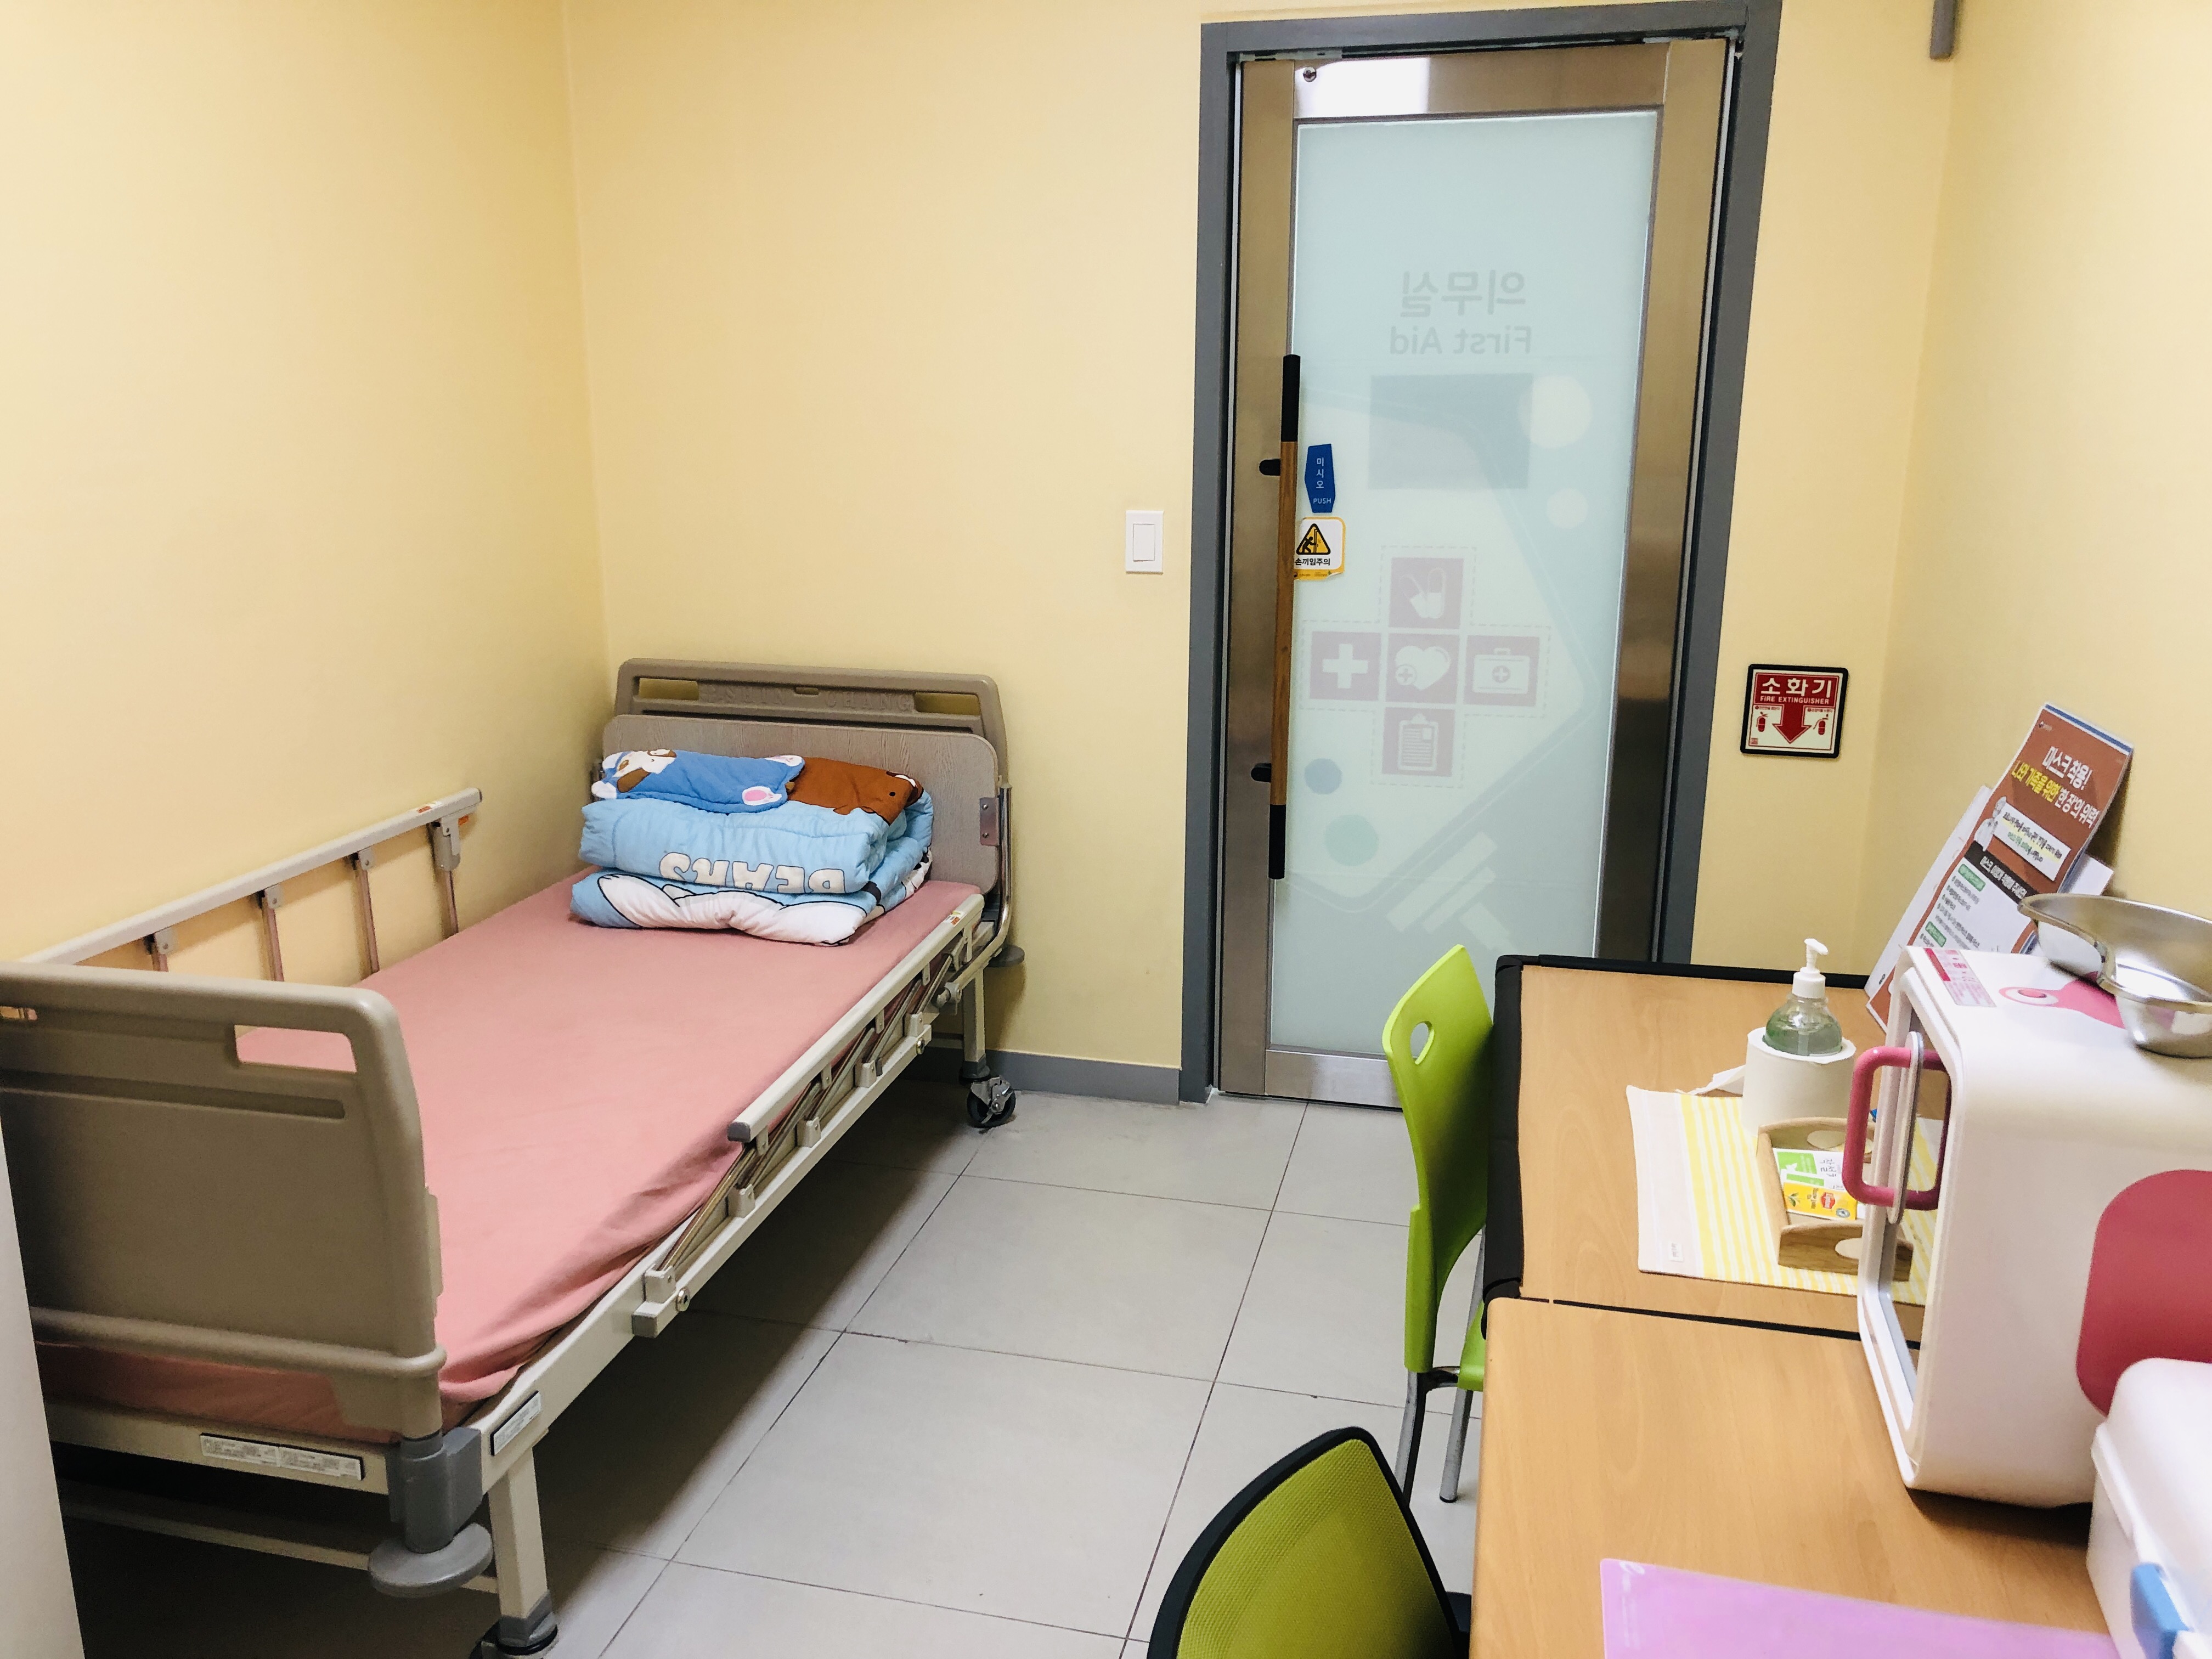 Facilities for pregnant women or family with children0 : Interior view of the medical room at Children's Science Center where patient beds are provided